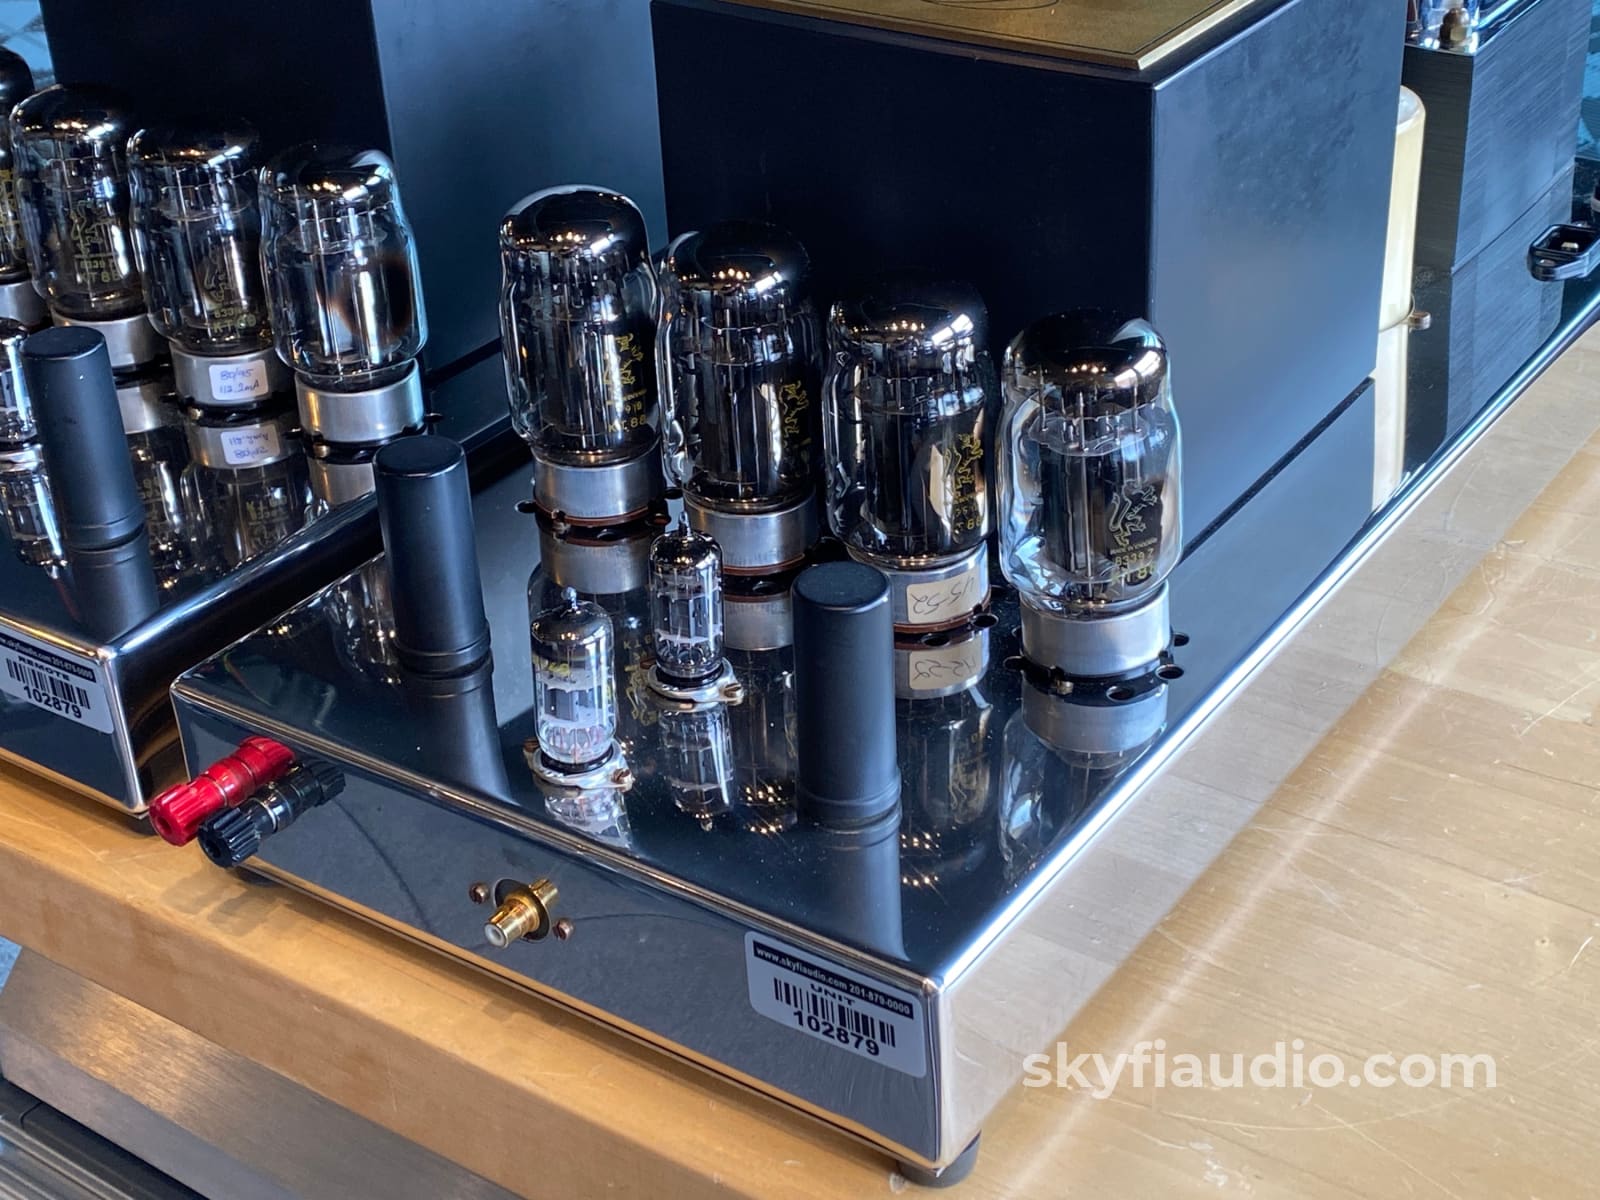 Jadis Ja80 Tube Monoblocks W/Sound Anchor Stands - Made In France Amplifier